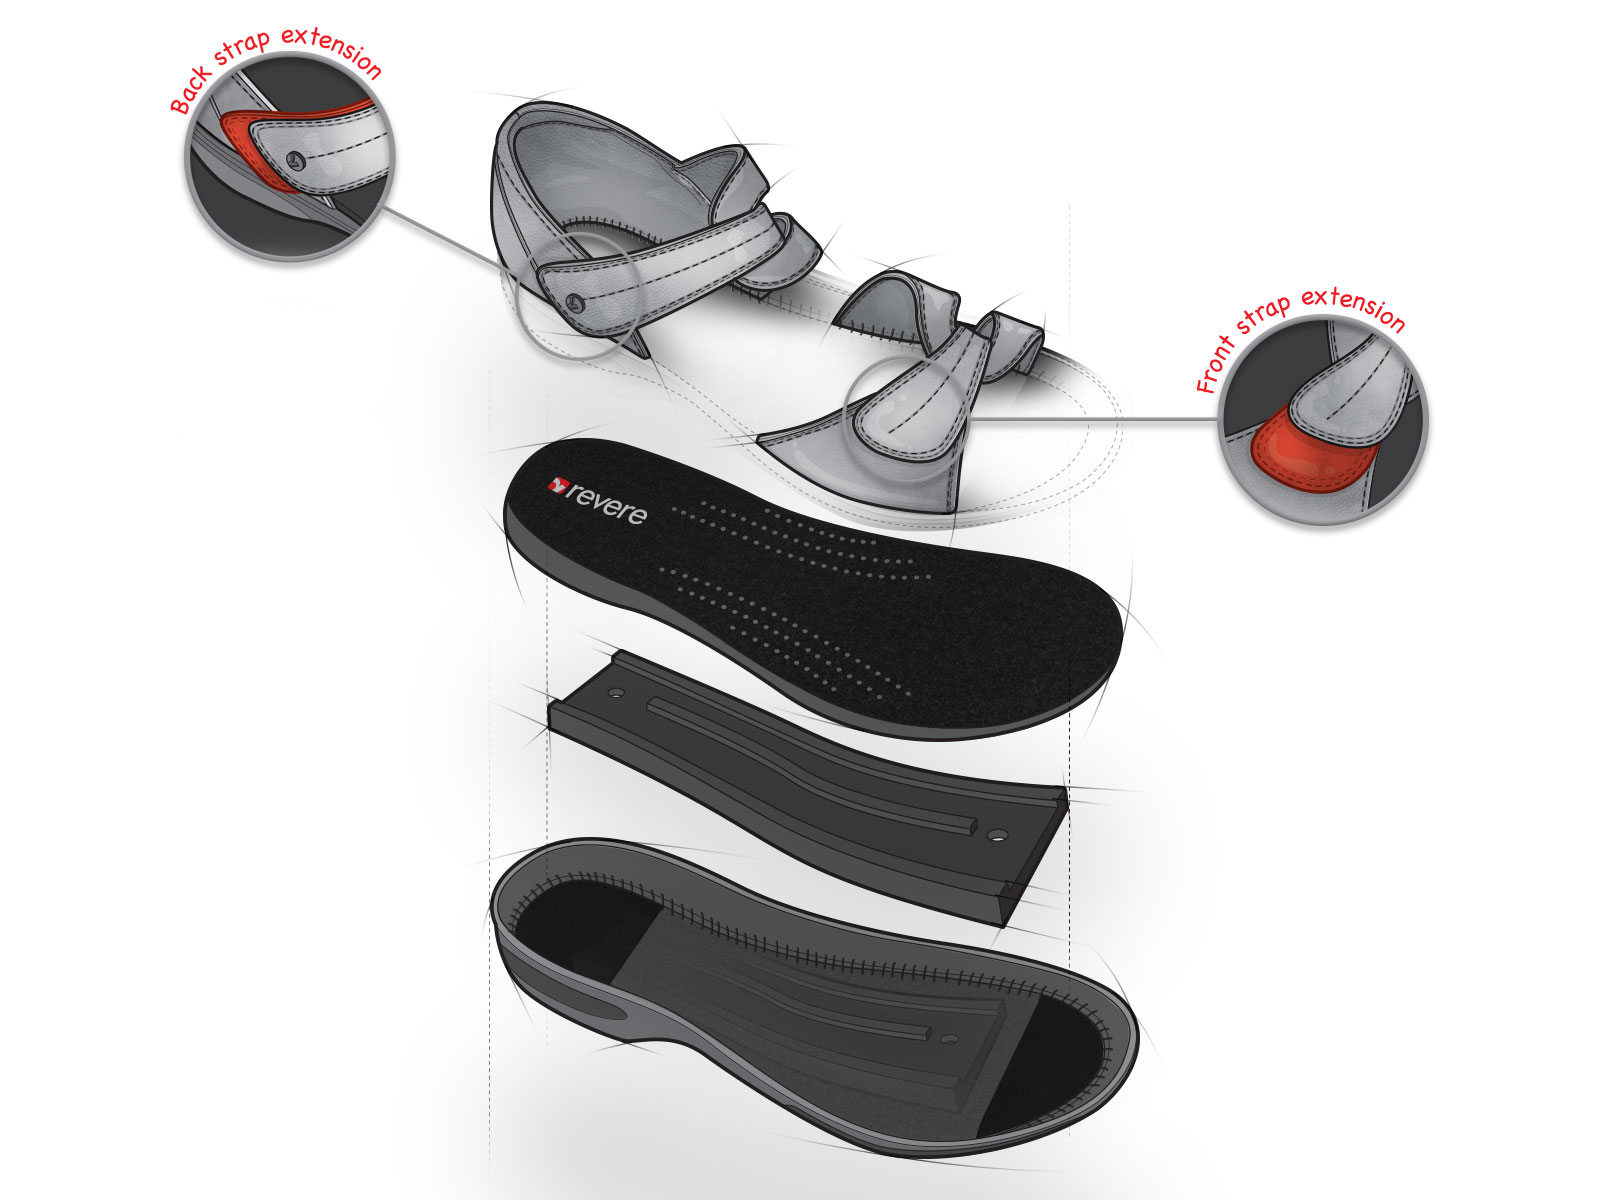 Elevated blowout technical illustration of medical footware